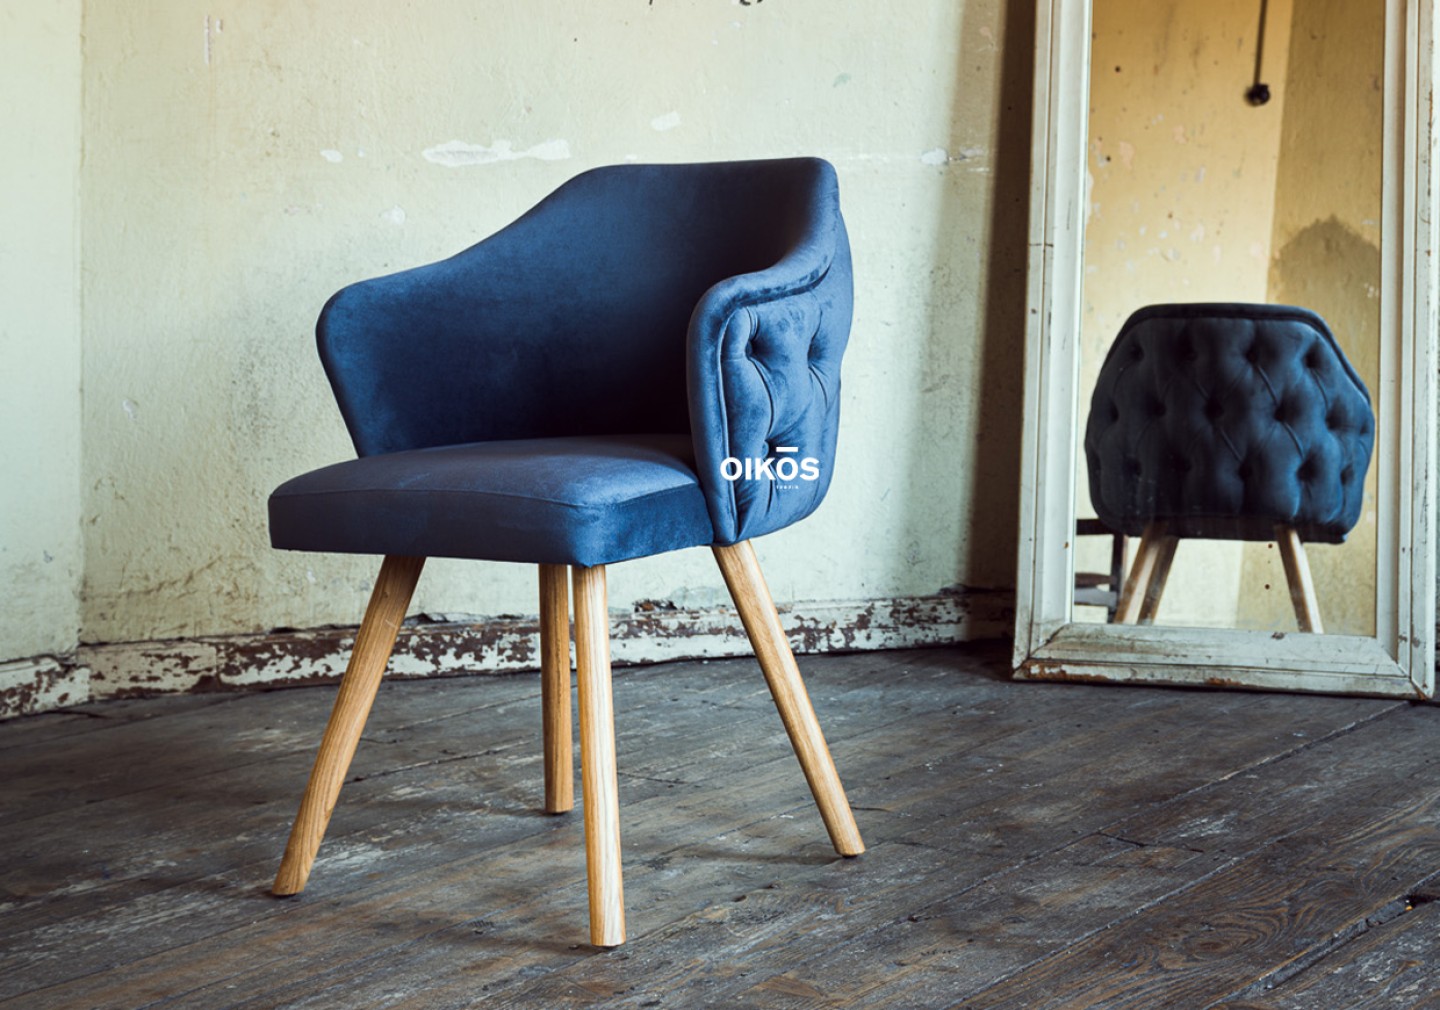 THE SPENCER DINING CHAIR